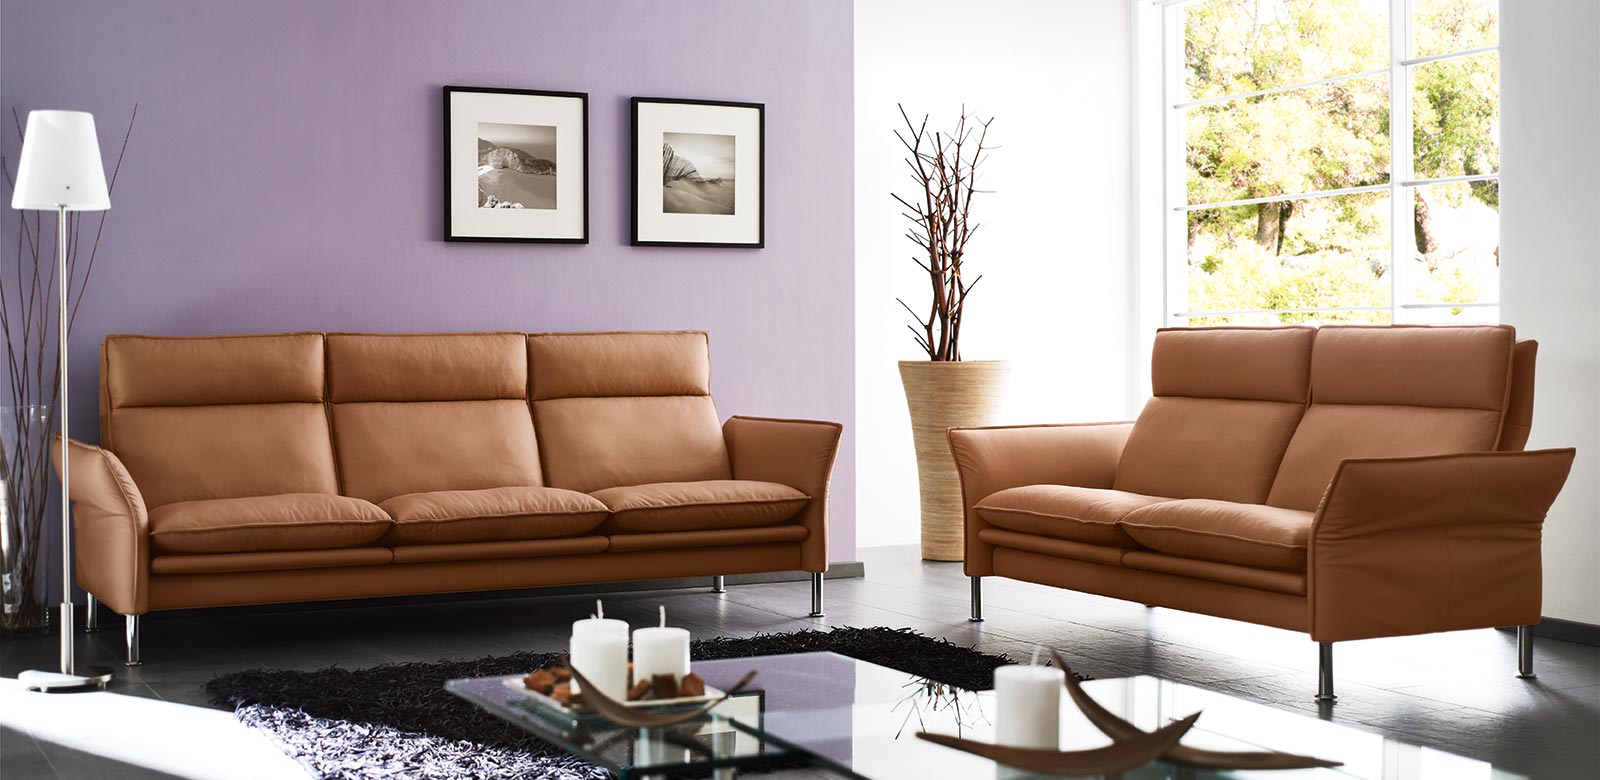 Porto 3-seater and 2-seater in light brown leather in a modern living room with a purple wall.